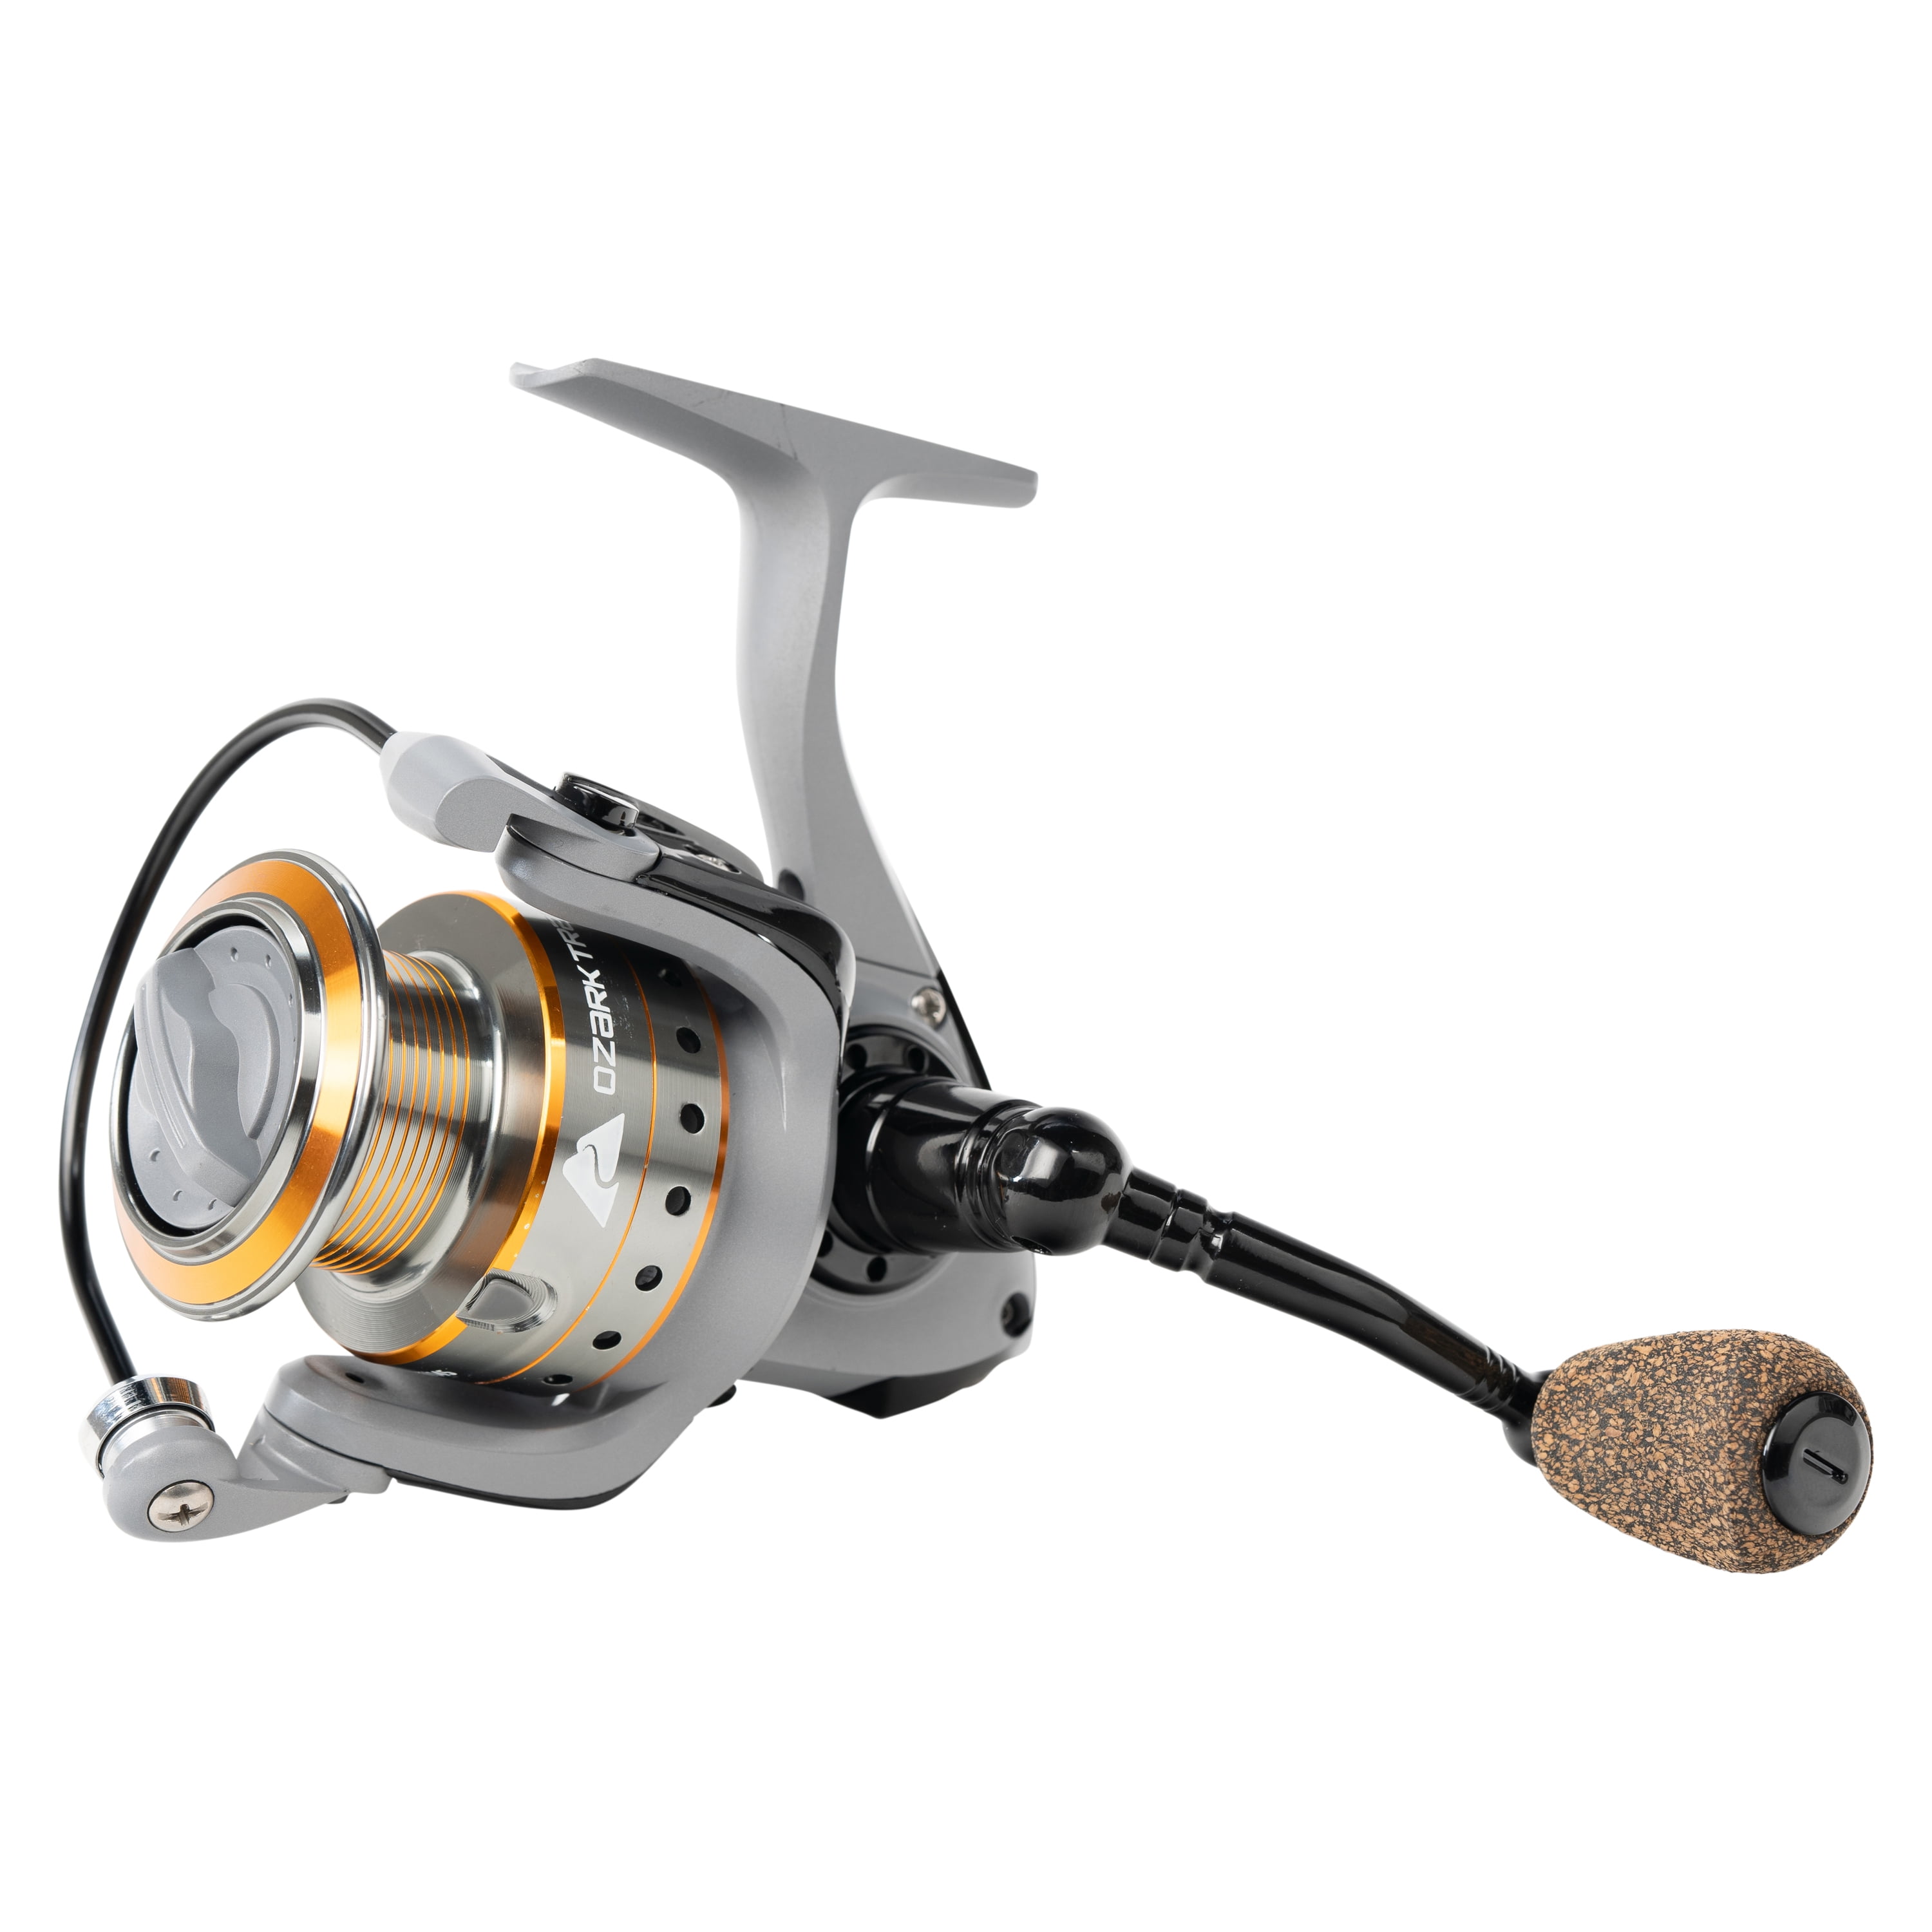 Walmart's Saltwater Sealed Reel From Ozark Trail Features Review   Walmart's sealed saltwater reel initial review. This reel is available in  4000, 6000 and 8000 sizes. In this video I go over